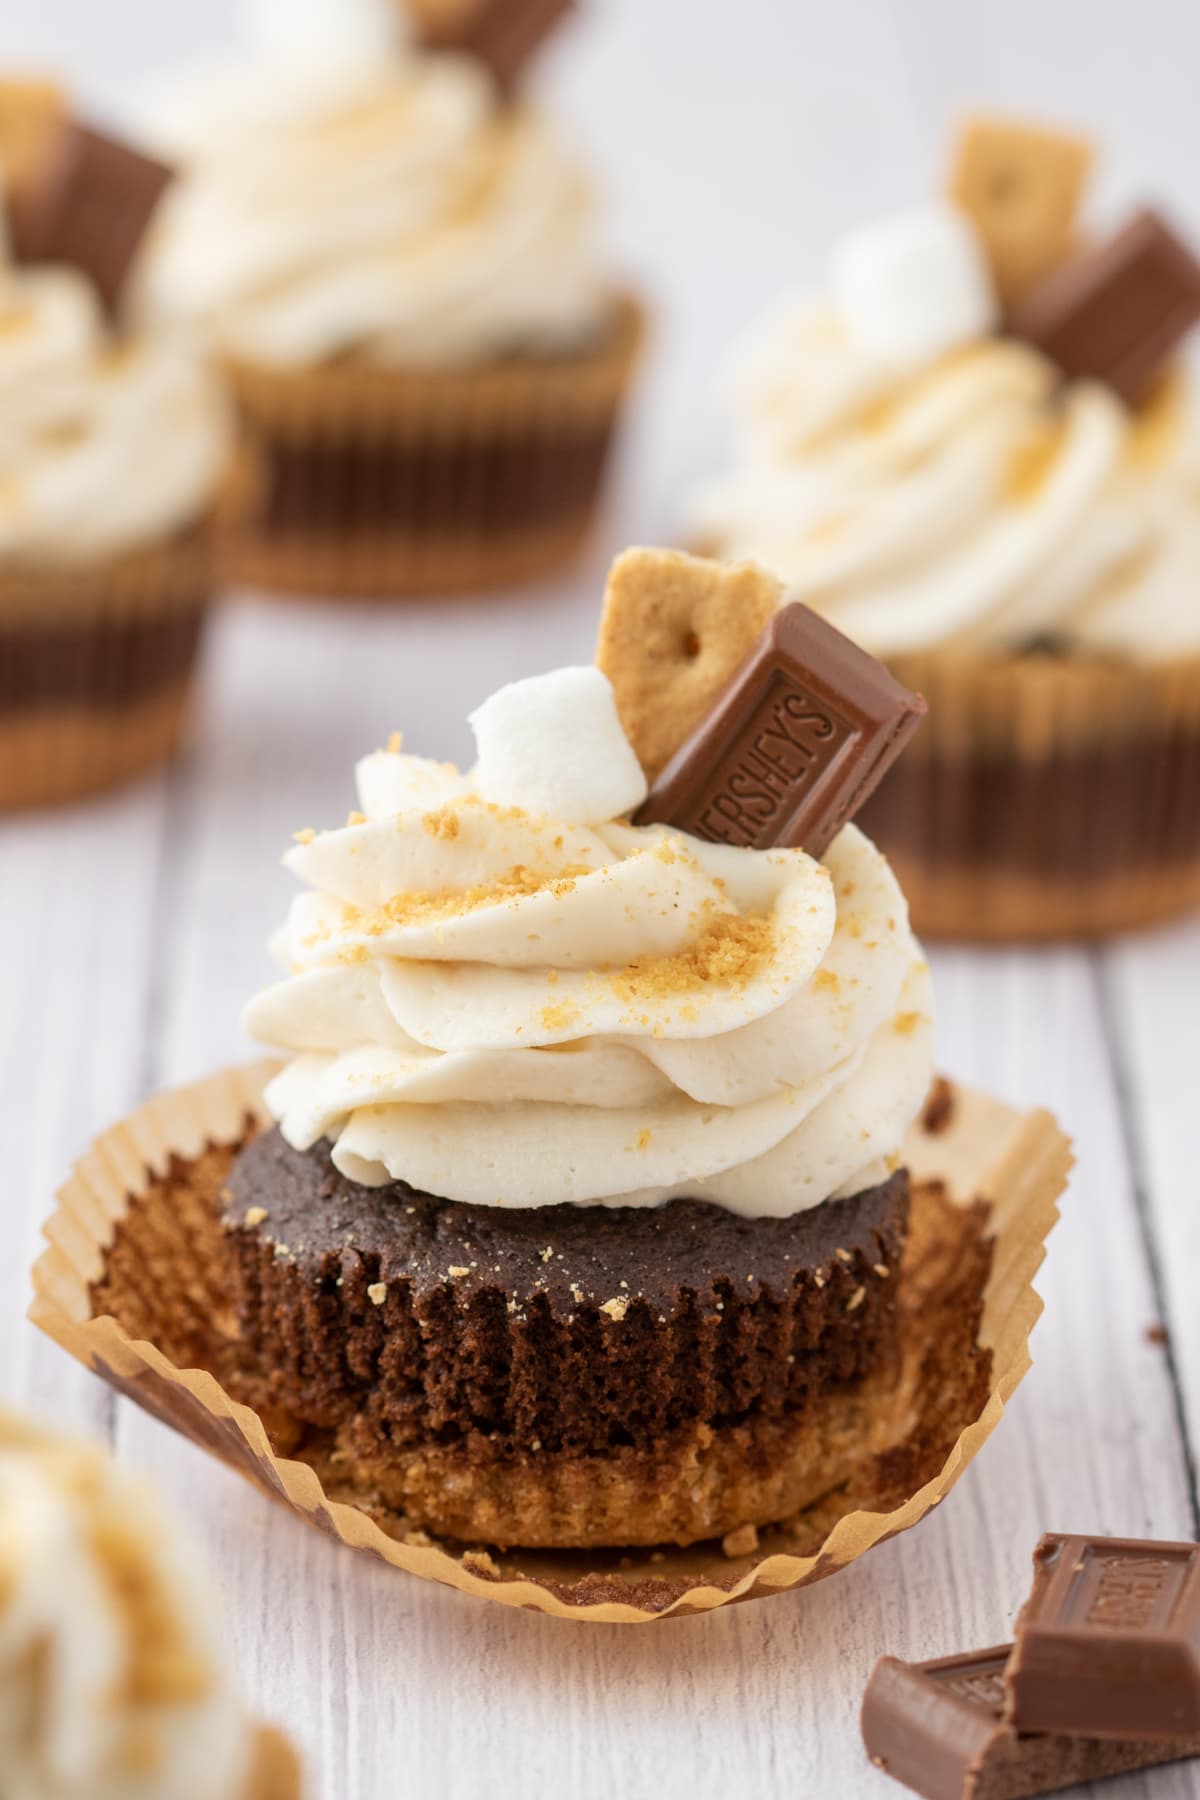 Final smore cupcake with the wrapper pulled off the sides to show the layers inside.